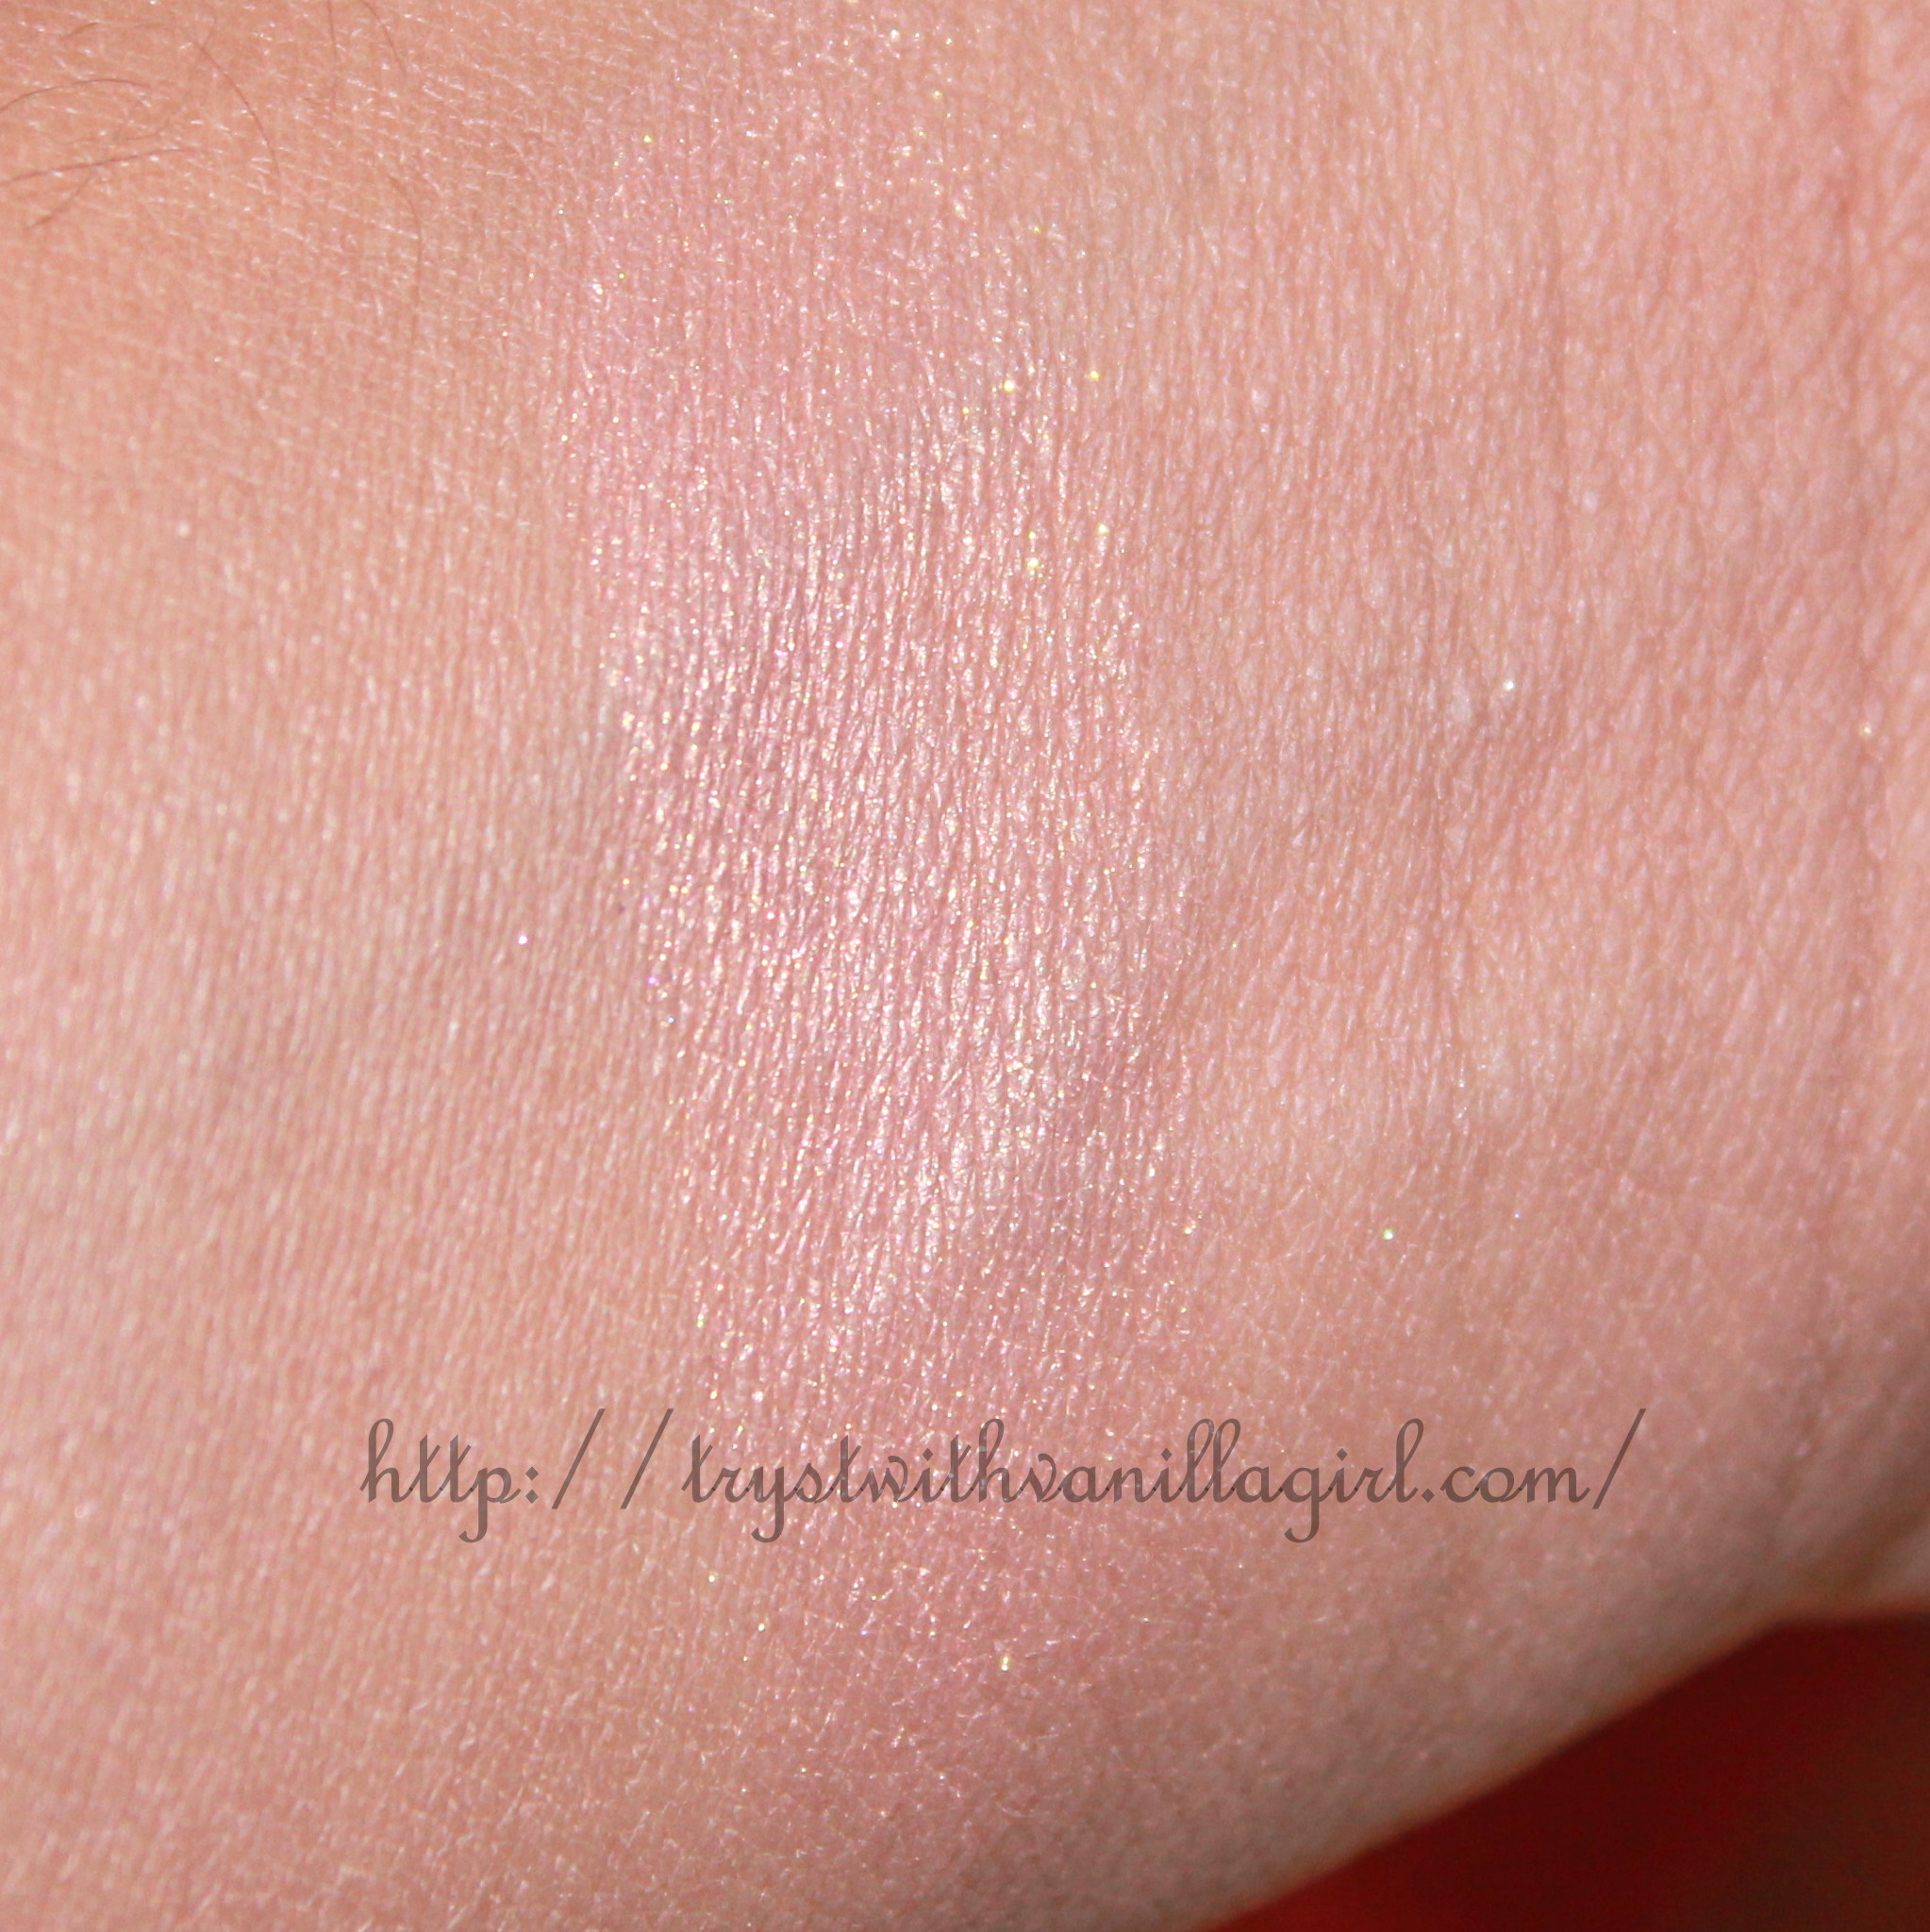 Bourjois Little Round Pot Blusher 35 Lune D'or Review,Swatch,Photos